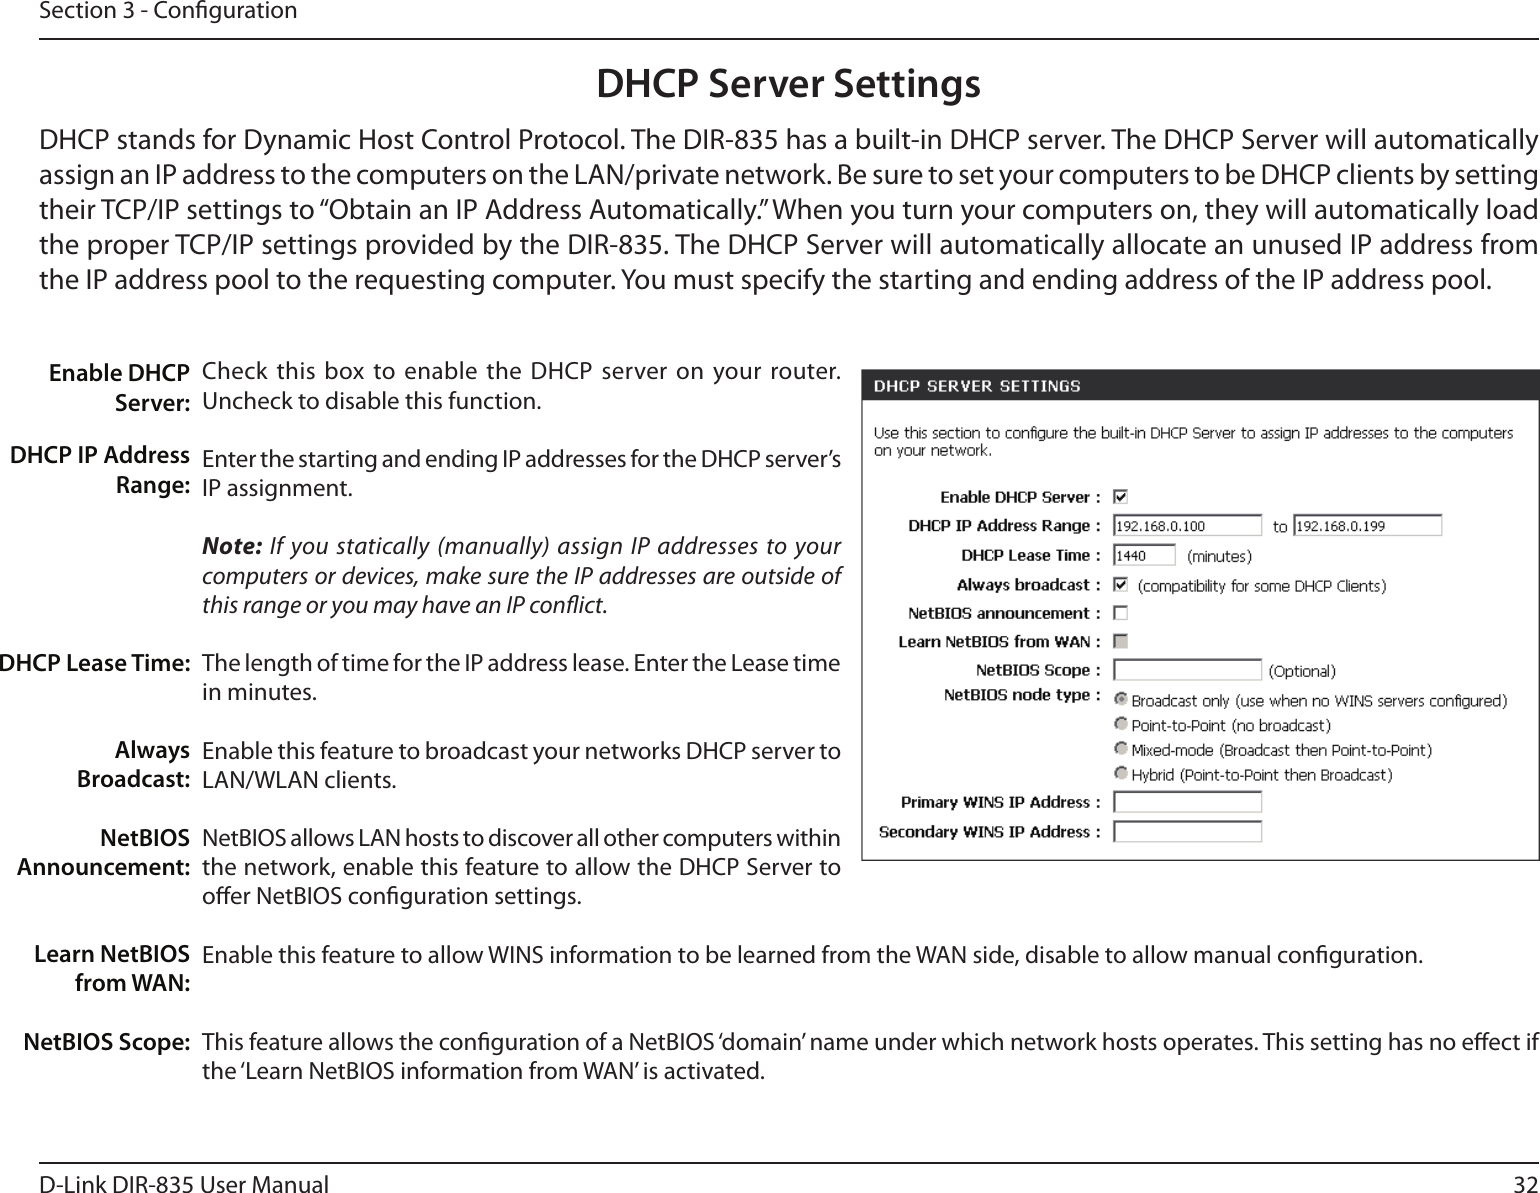 32D-Link DIR-835 User ManualSection 3 - CongurationDHCP Server SettingsDHCP stands for Dynamic Host Control Protocol. The DIR-835 has a built-in DHCP server. The DHCP Server will automatically assign an IP address to the computers on the LAN/private network. Be sure to set your computers to be DHCP clients by setting their TCP/IP settings to “Obtain an IP Address Automatically.” When you turn your computers on, they will automatically load the proper TCP/IP settings provided by the DIR-835. The DHCP Server will automatically allocate an unused IP address from the IP address pool to the requesting computer. You must specify the starting and ending address of the IP address pool.Check this  box to enable  the DHCP  server on your router. Uncheck to disable this function.Enter the starting and ending IP addresses for the DHCP server’s IP assignment.Note: If you statically (manually) assign IP addresses to your computers or devices, make sure the IP addresses are outside of this range or you may have an IP conict. The length of time for the IP address lease. Enter the Lease time in minutes.Enable this feature to broadcast your networks DHCP server to LAN/WLAN clients.NetBIOS allows LAN hosts to discover all other computers within the network, enable this feature to allow the DHCP Server to oer NetBIOS conguration settings.Enable this feature to allow WINS information to be learned from the WAN side, disable to allow manual conguration.This feature allows the conguration of a NetBIOS ‘domain’ name under which network hosts operates. This setting has no eect if the ‘Learn NetBIOS information from WAN’ is activated.Enable DHCP Server:DHCP IP Address Range:DHCP Lease Time:Always Broadcast:NetBIOS Announcement:Learn NetBIOS from WAN:NetBIOS Scope: